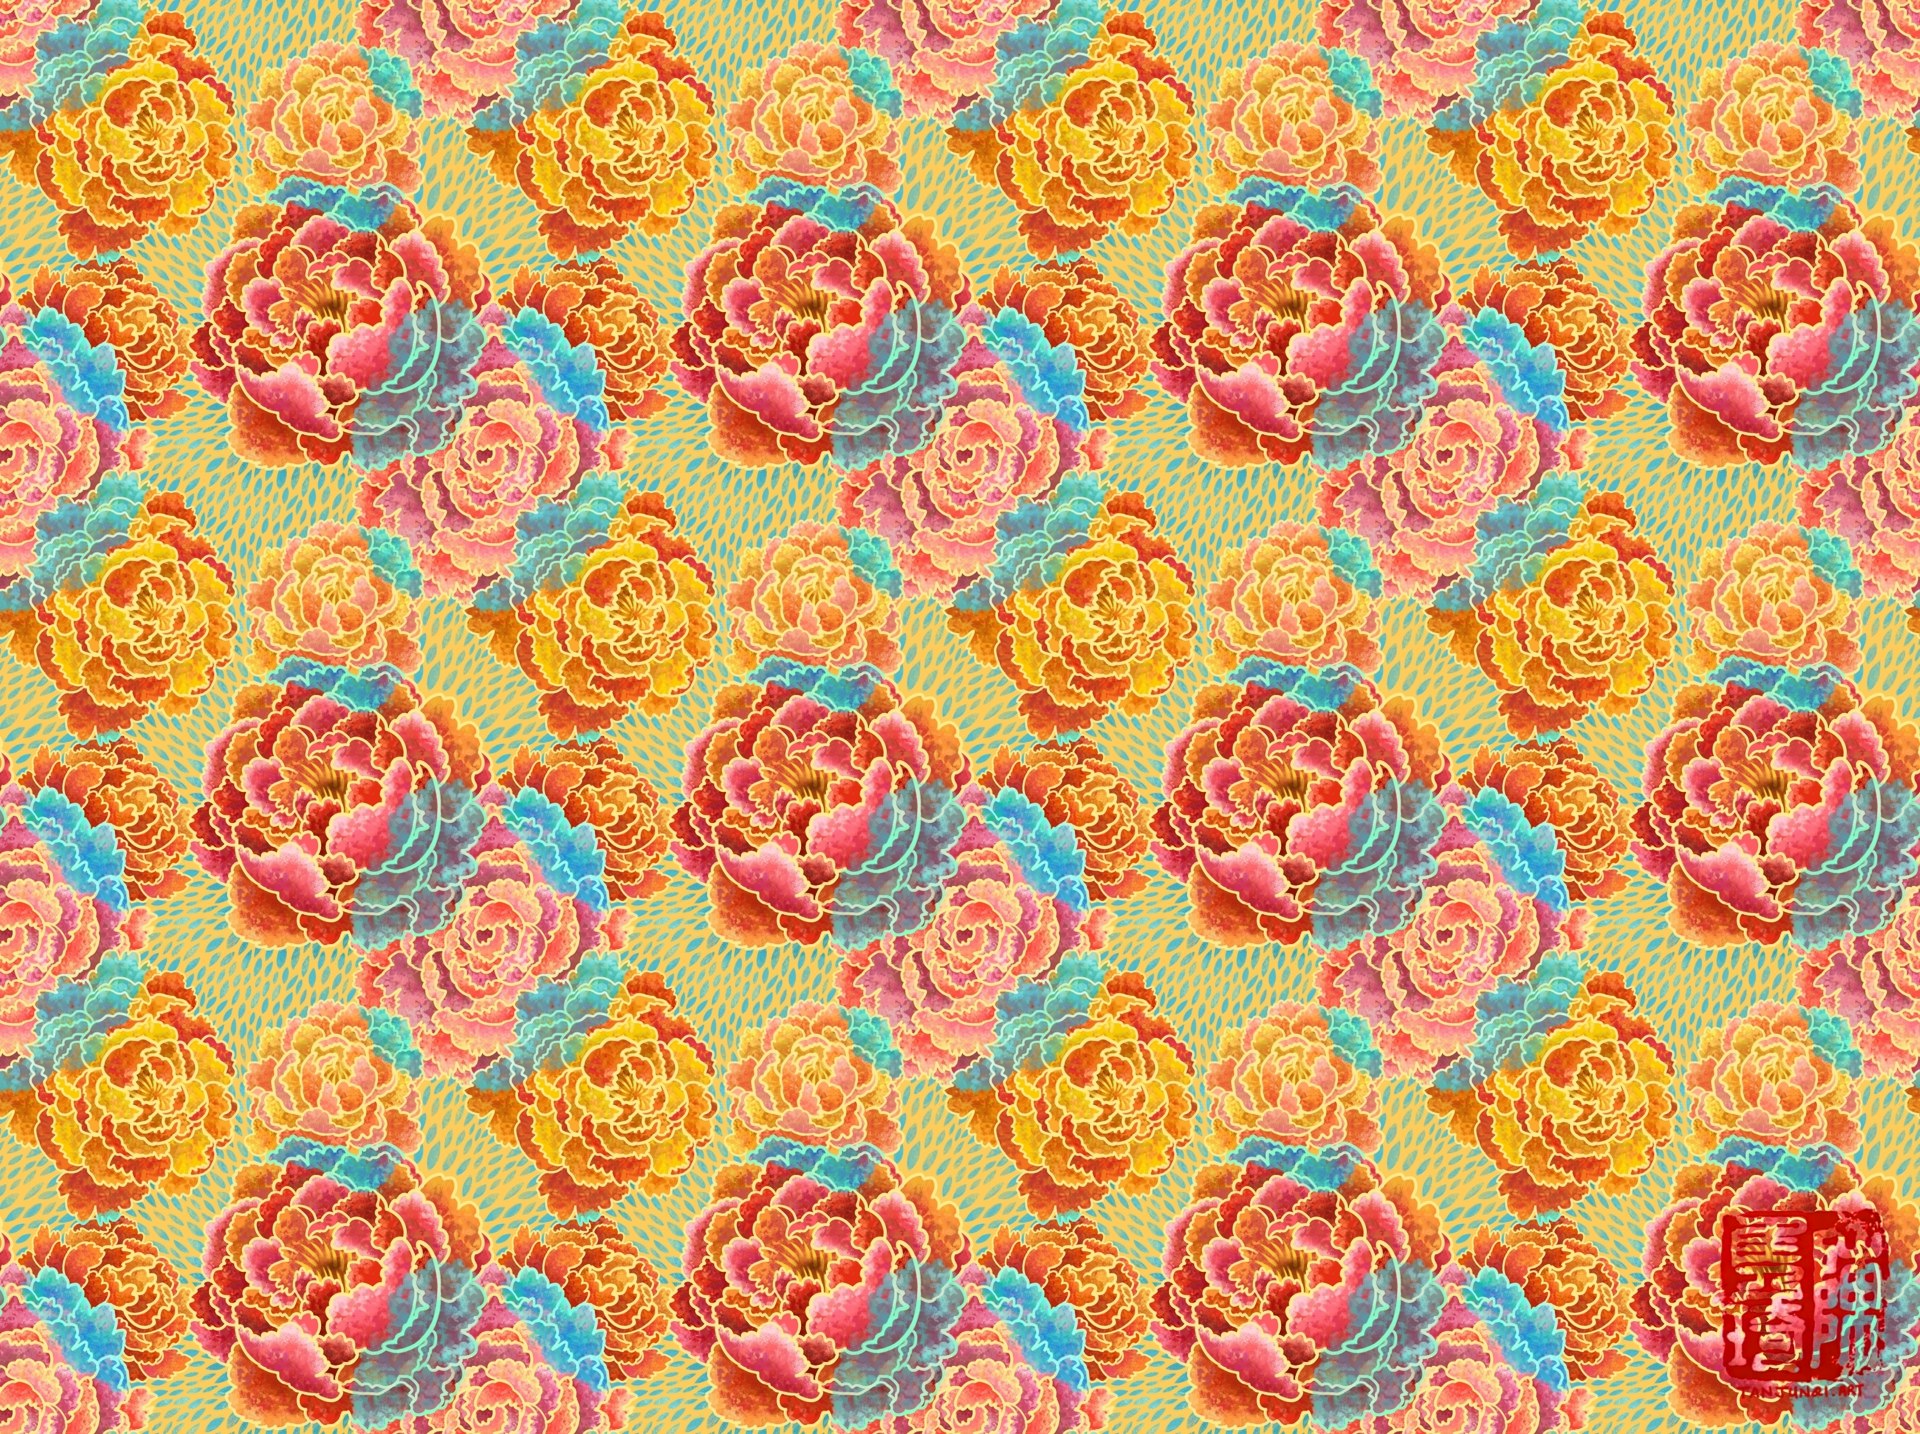 Digitally painted floral design of overlapping pink and orange peonies, done in a slightly graphic and textured style inspired by batik and Chinese papercuts. The peonies are different hues of pink and orange, while the outlines are golden, and their overlapping parts are light blue and turquoise, against a golden background with a light blue pattern. The pattern is repeated over a larger area.